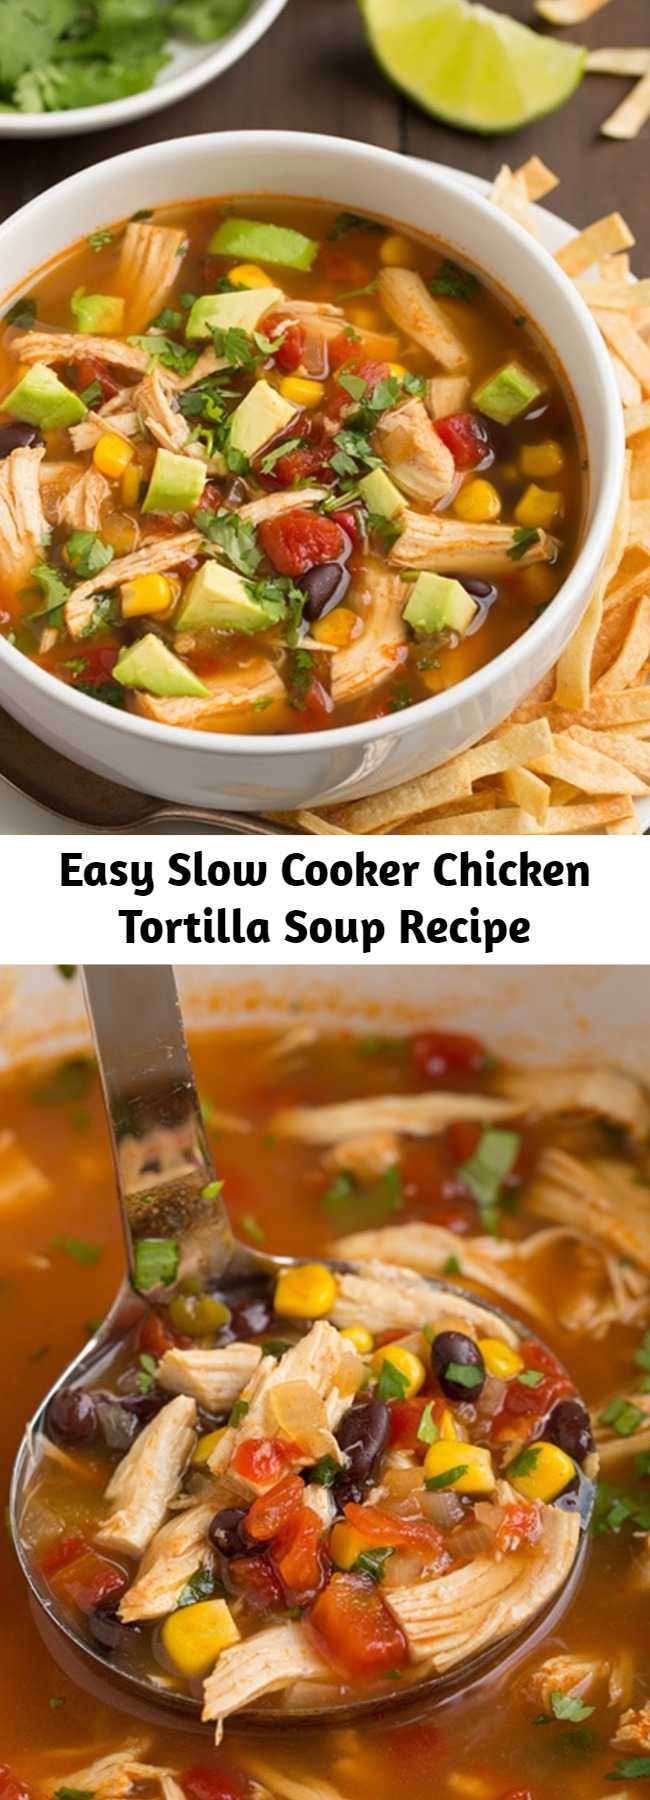 Easy Slow Cooker Chicken Tortilla Soup Recipe - A flavorful, hearty and comforting Chicken Tortilla Soup made easy with the slow cooker! It's perfect for serving year round but it's especially satisfying on a chili day. Just be sure to load on those toppings!